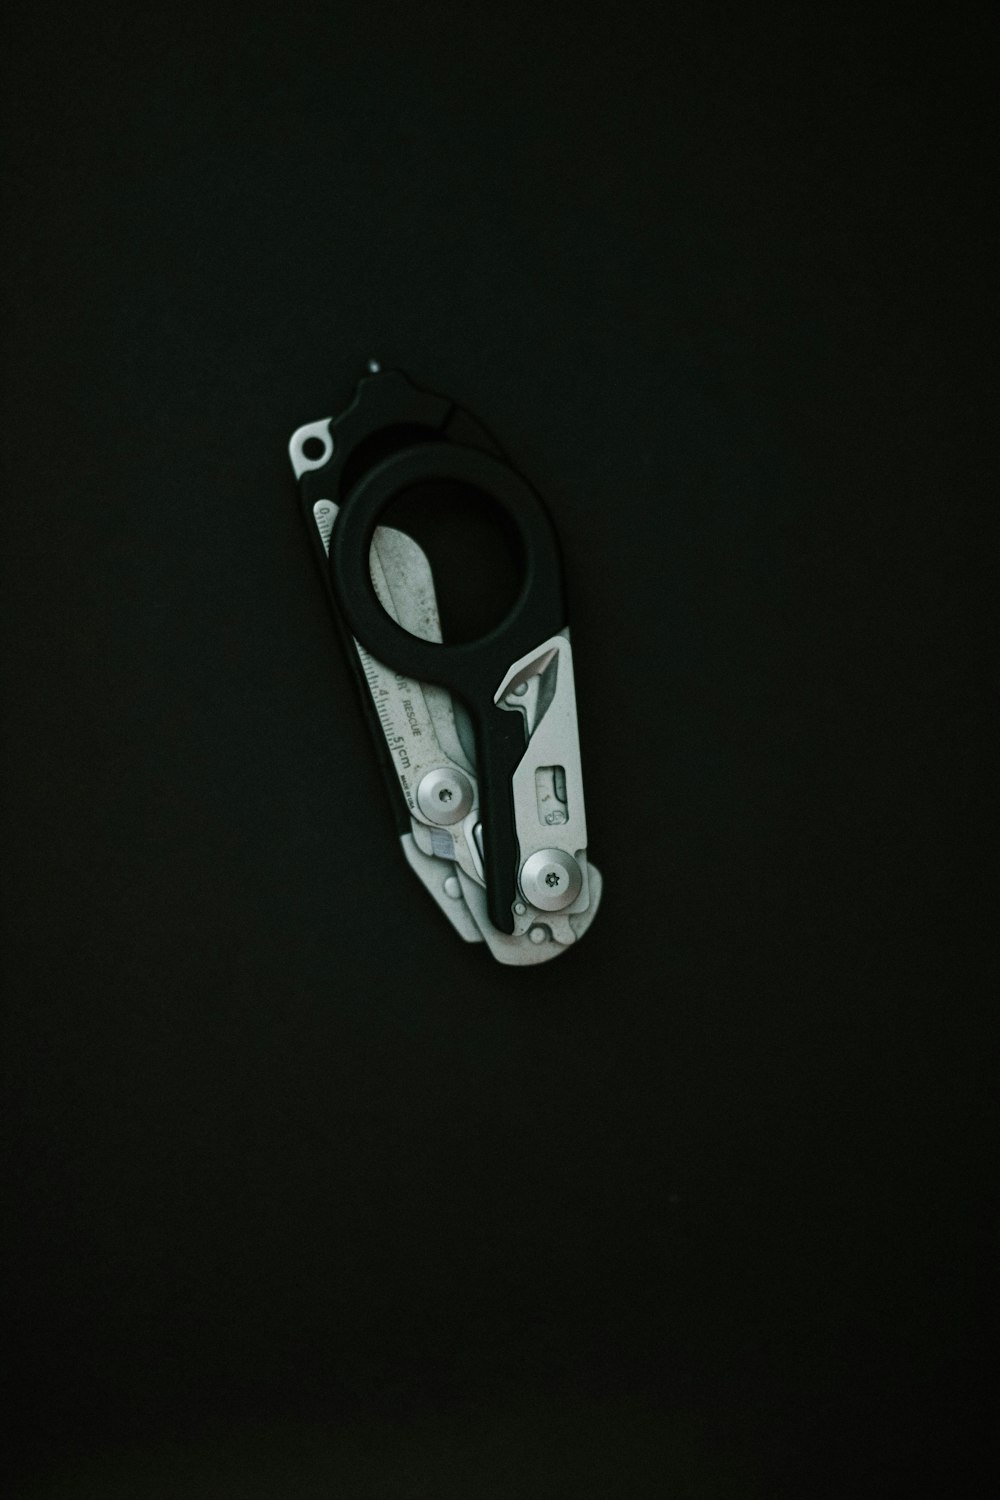 a close up of a pair of scissors on a black surface